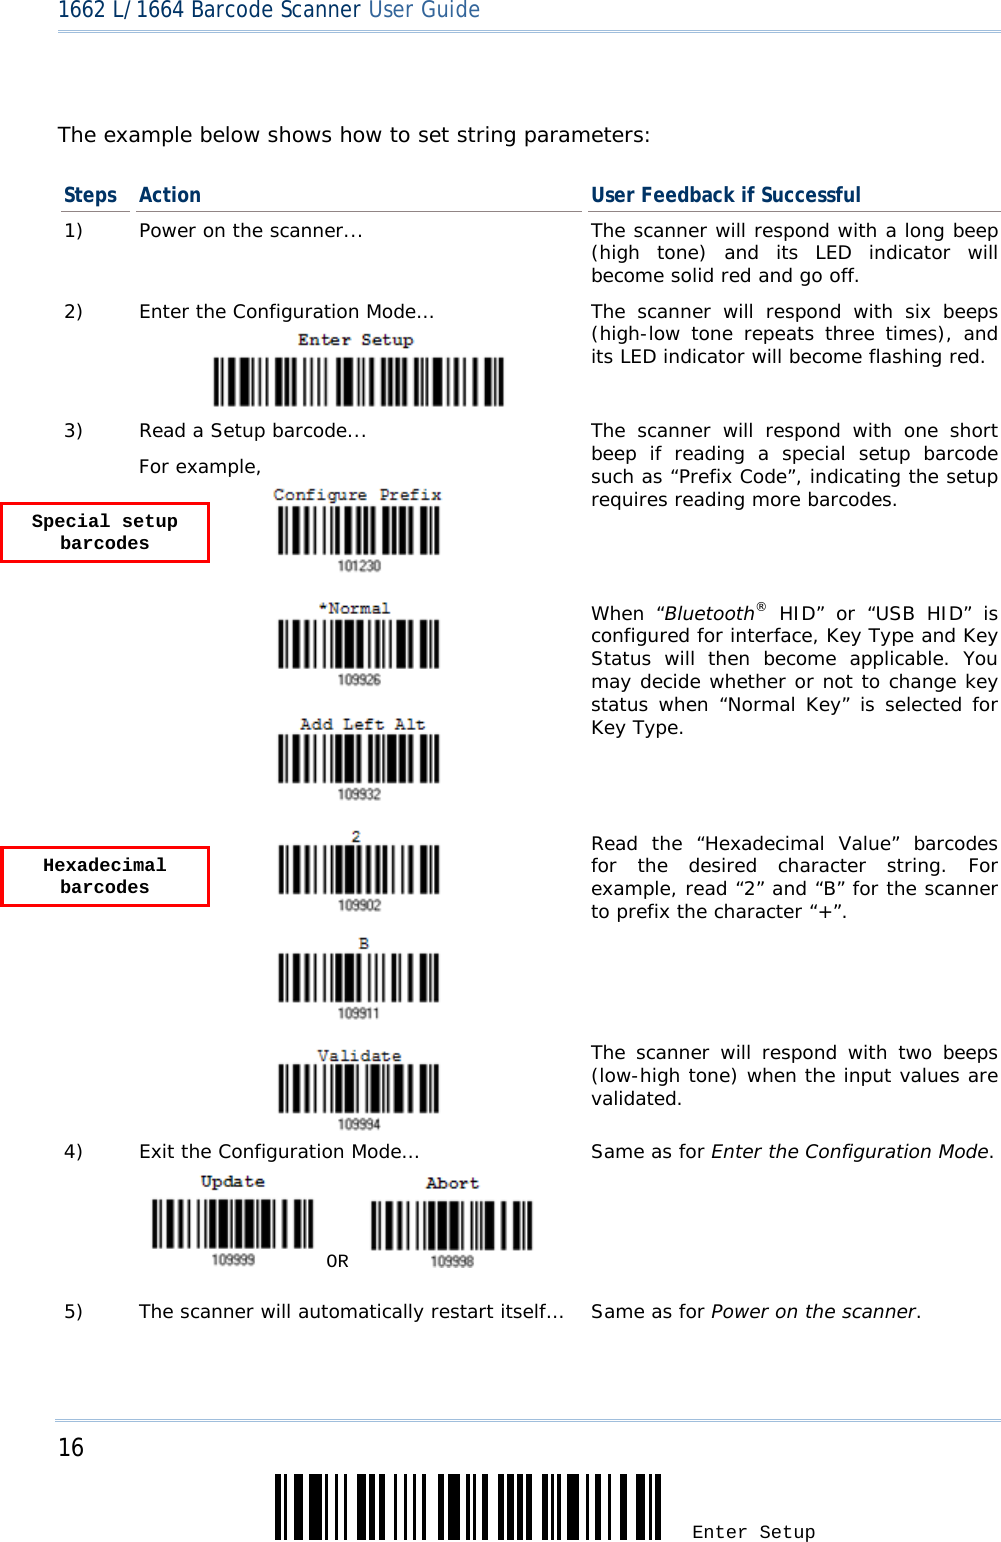 16 Enter Setup 1662 L/1664 Barcode Scanner User Guide   The example below shows how to set string parameters: Steps  Action  User Feedback if Successful 1)  Power on the scanner...  The scanner will respond with a long beep (high tone) and its LED indicator will become solid red and go off. 2)  Enter the Configuration Mode… The scanner will respond with six beeps (high-low tone repeats three times), and its LED indicator will become flashing red.  3)  Read a Setup barcode... For example,   The scanner will respond with one short beep if reading a special setup barcode such as “Prefix Code”, indicating the setup requires reading more barcodes.       When “Bluetooth® HID” or “USB HID” is configured for interface, Key Type and Key Status will then become applicable. You may decide whether or not to change key status when “Normal Key” is selected for Key Type.      Read the “Hexadecimal Value” barcodes for the desired character string. For example, read “2” and “B” for the scanner to prefix the character “+”.    The scanner will respond with two beeps (low-high tone) when the input values are validated. 4)  Exit the Configuration Mode…   OR     Same as for Enter the Configuration Mode. 5)  The scanner will automatically restart itself…  Same as for Power on the scanner.  Special setup barcodes Hexadecimal barcodes 